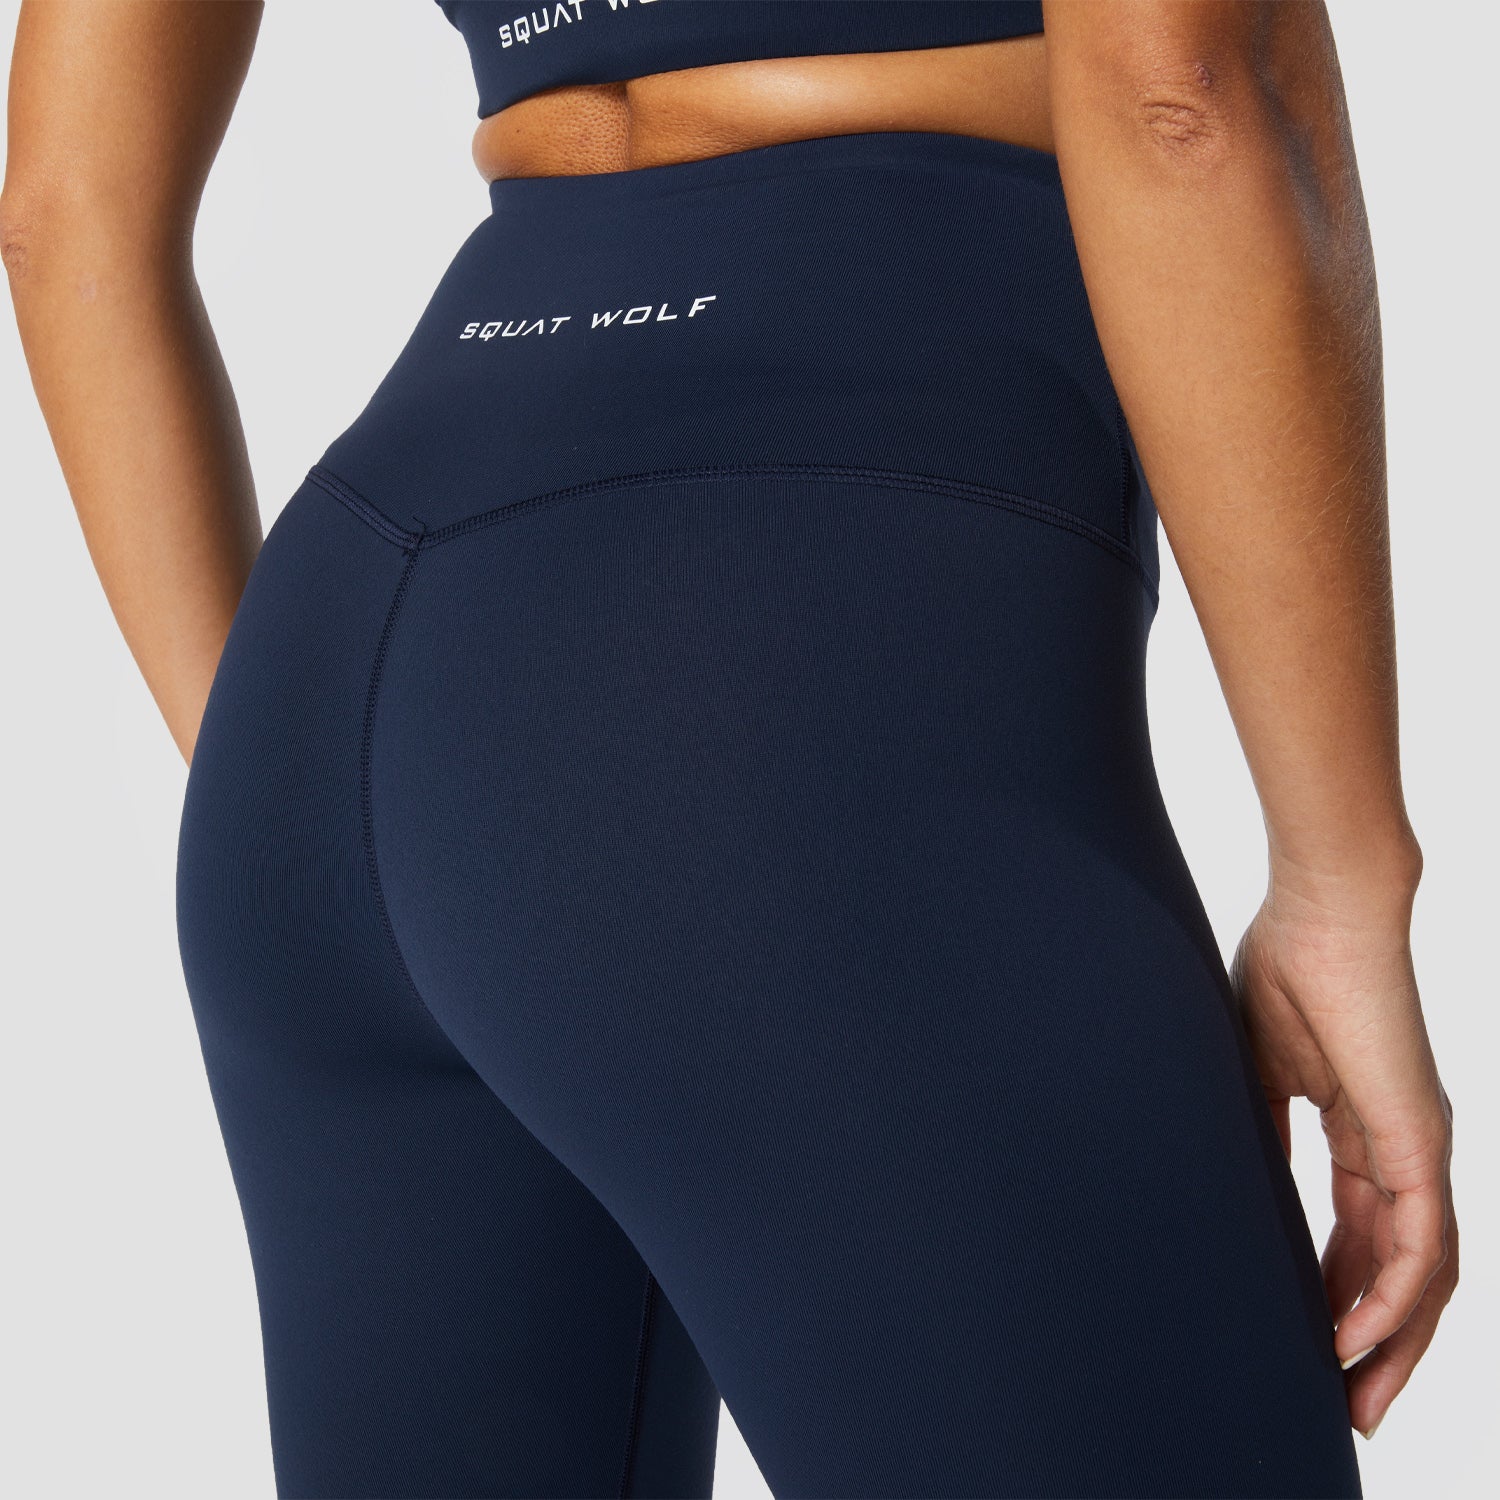 squatwolf-workout-clothes-hera-high-waisted-leggings-navy-gym-leggings-for-women